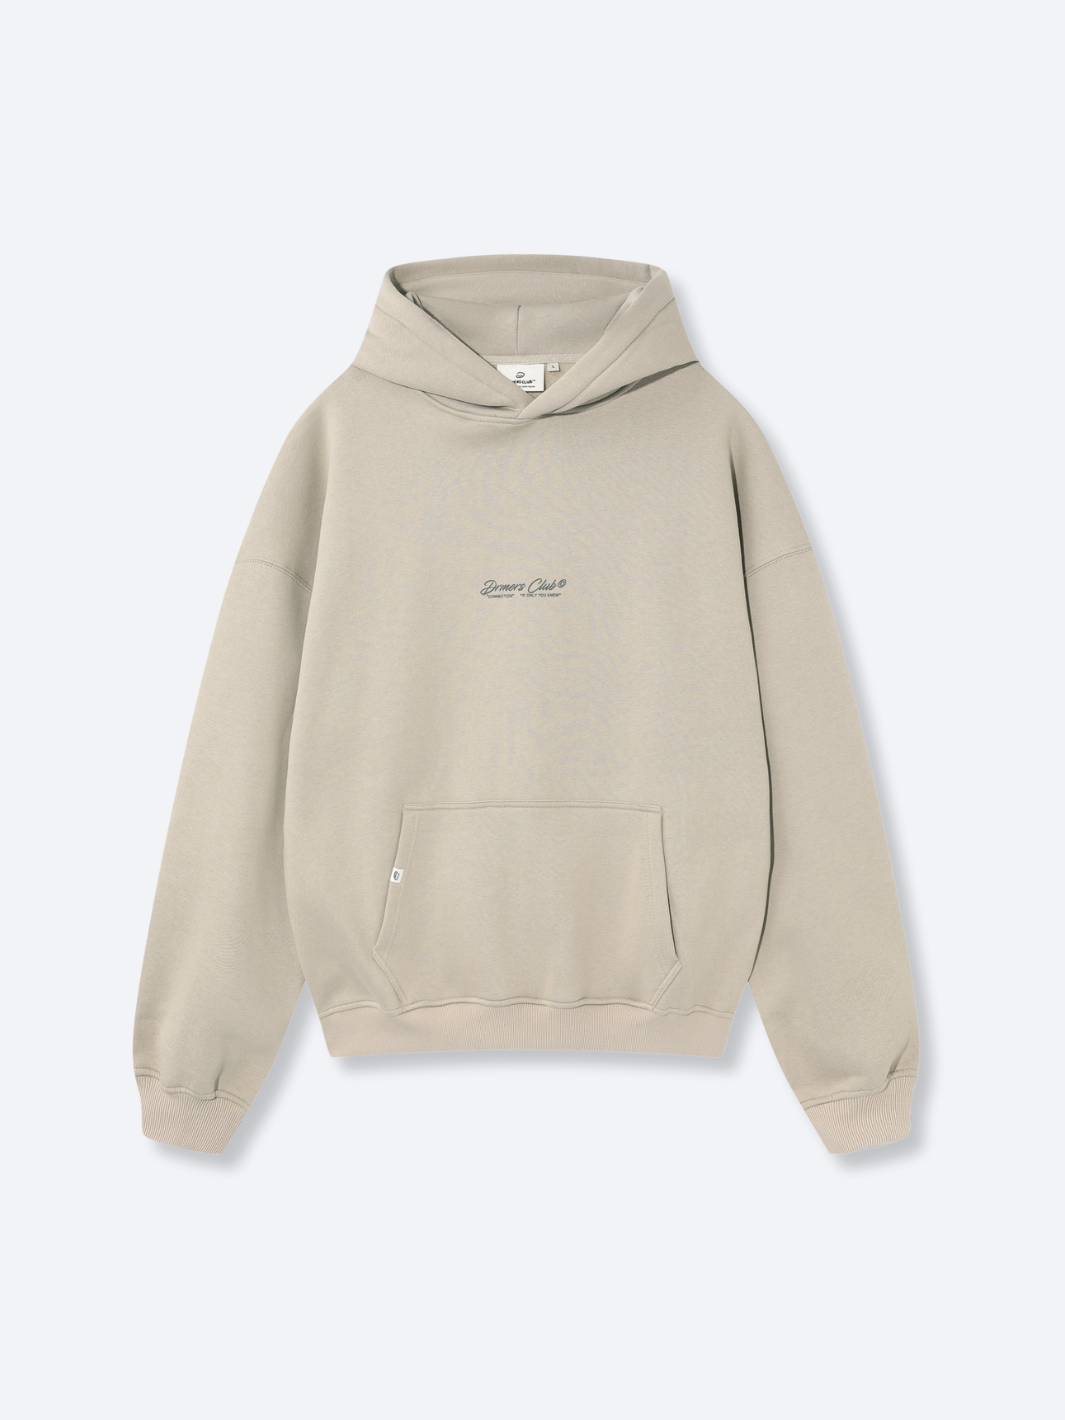 IF ONLY YOU KNEW HOODIE - TAN